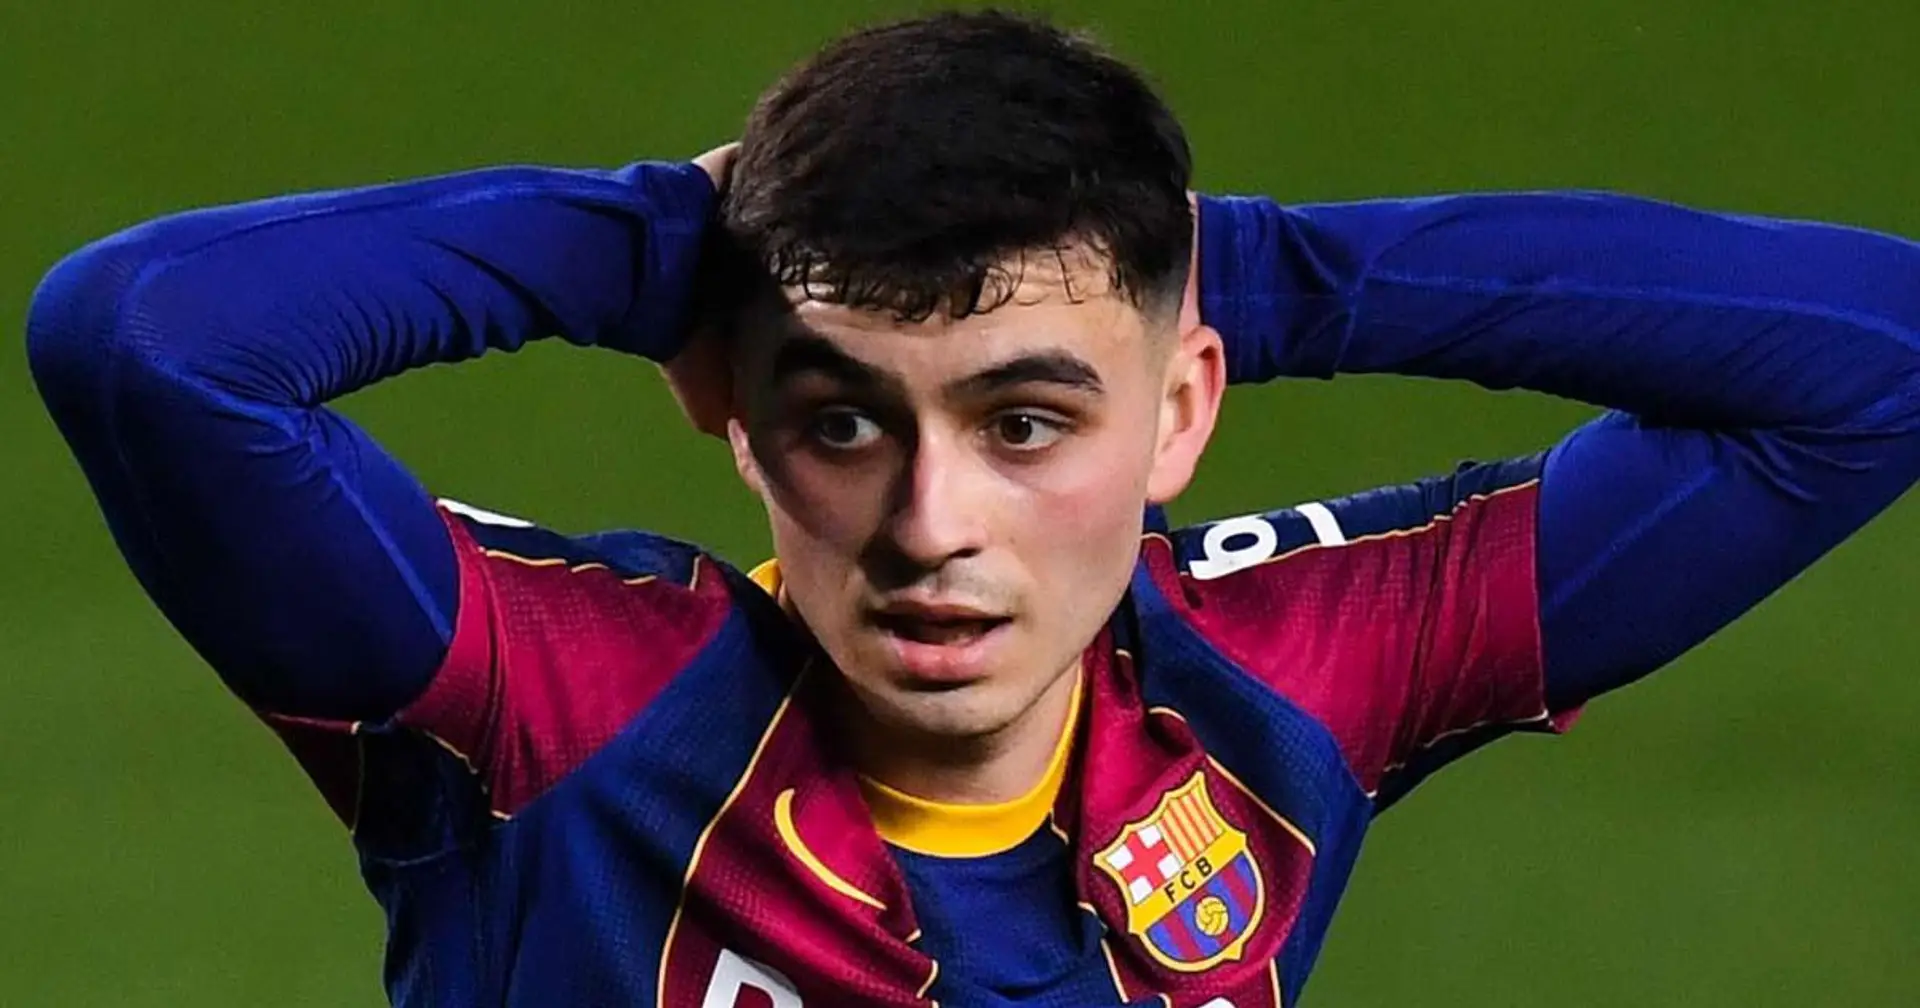 Barca reportedly to let Pedri leave on early vacation with youngster exhausted by number of games